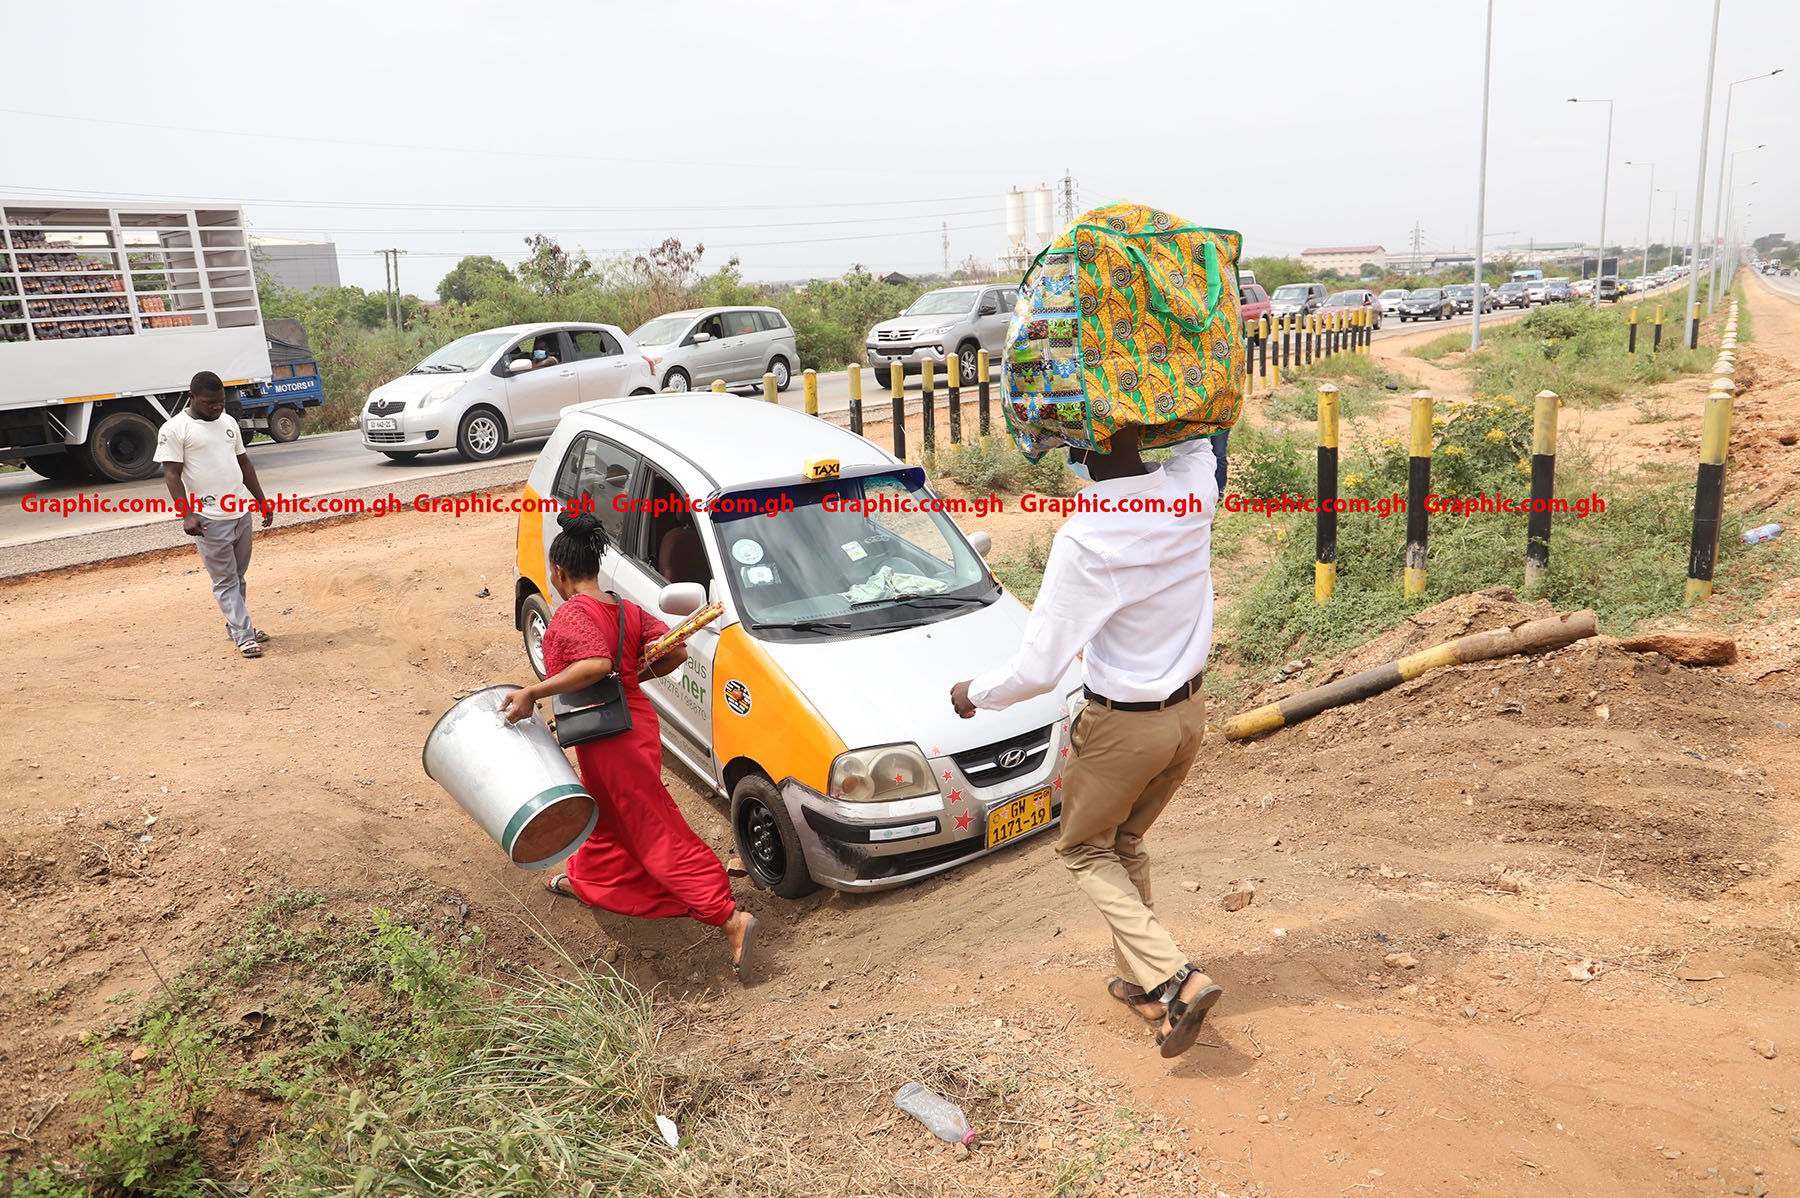 A taxi driver caught red handed after his car got trapped in the median of the road with other pedestrians crossing the road